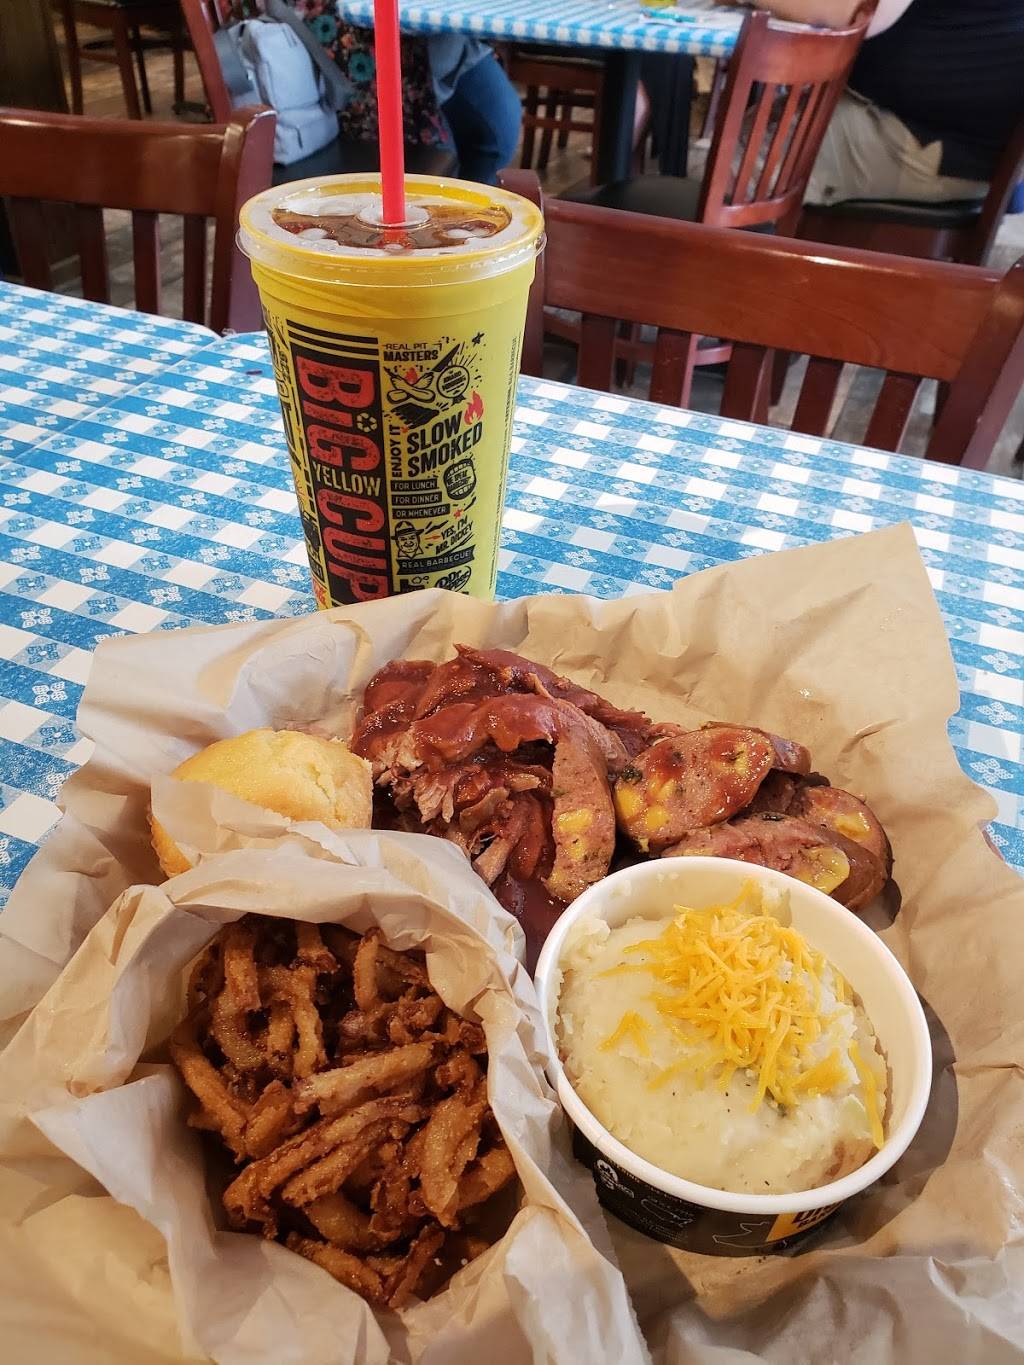 Dickeys Barbecue Pit | 8225 Greenway Blvd Ste 200, Middleton, WI 53562 | Phone: (608) 827-9000